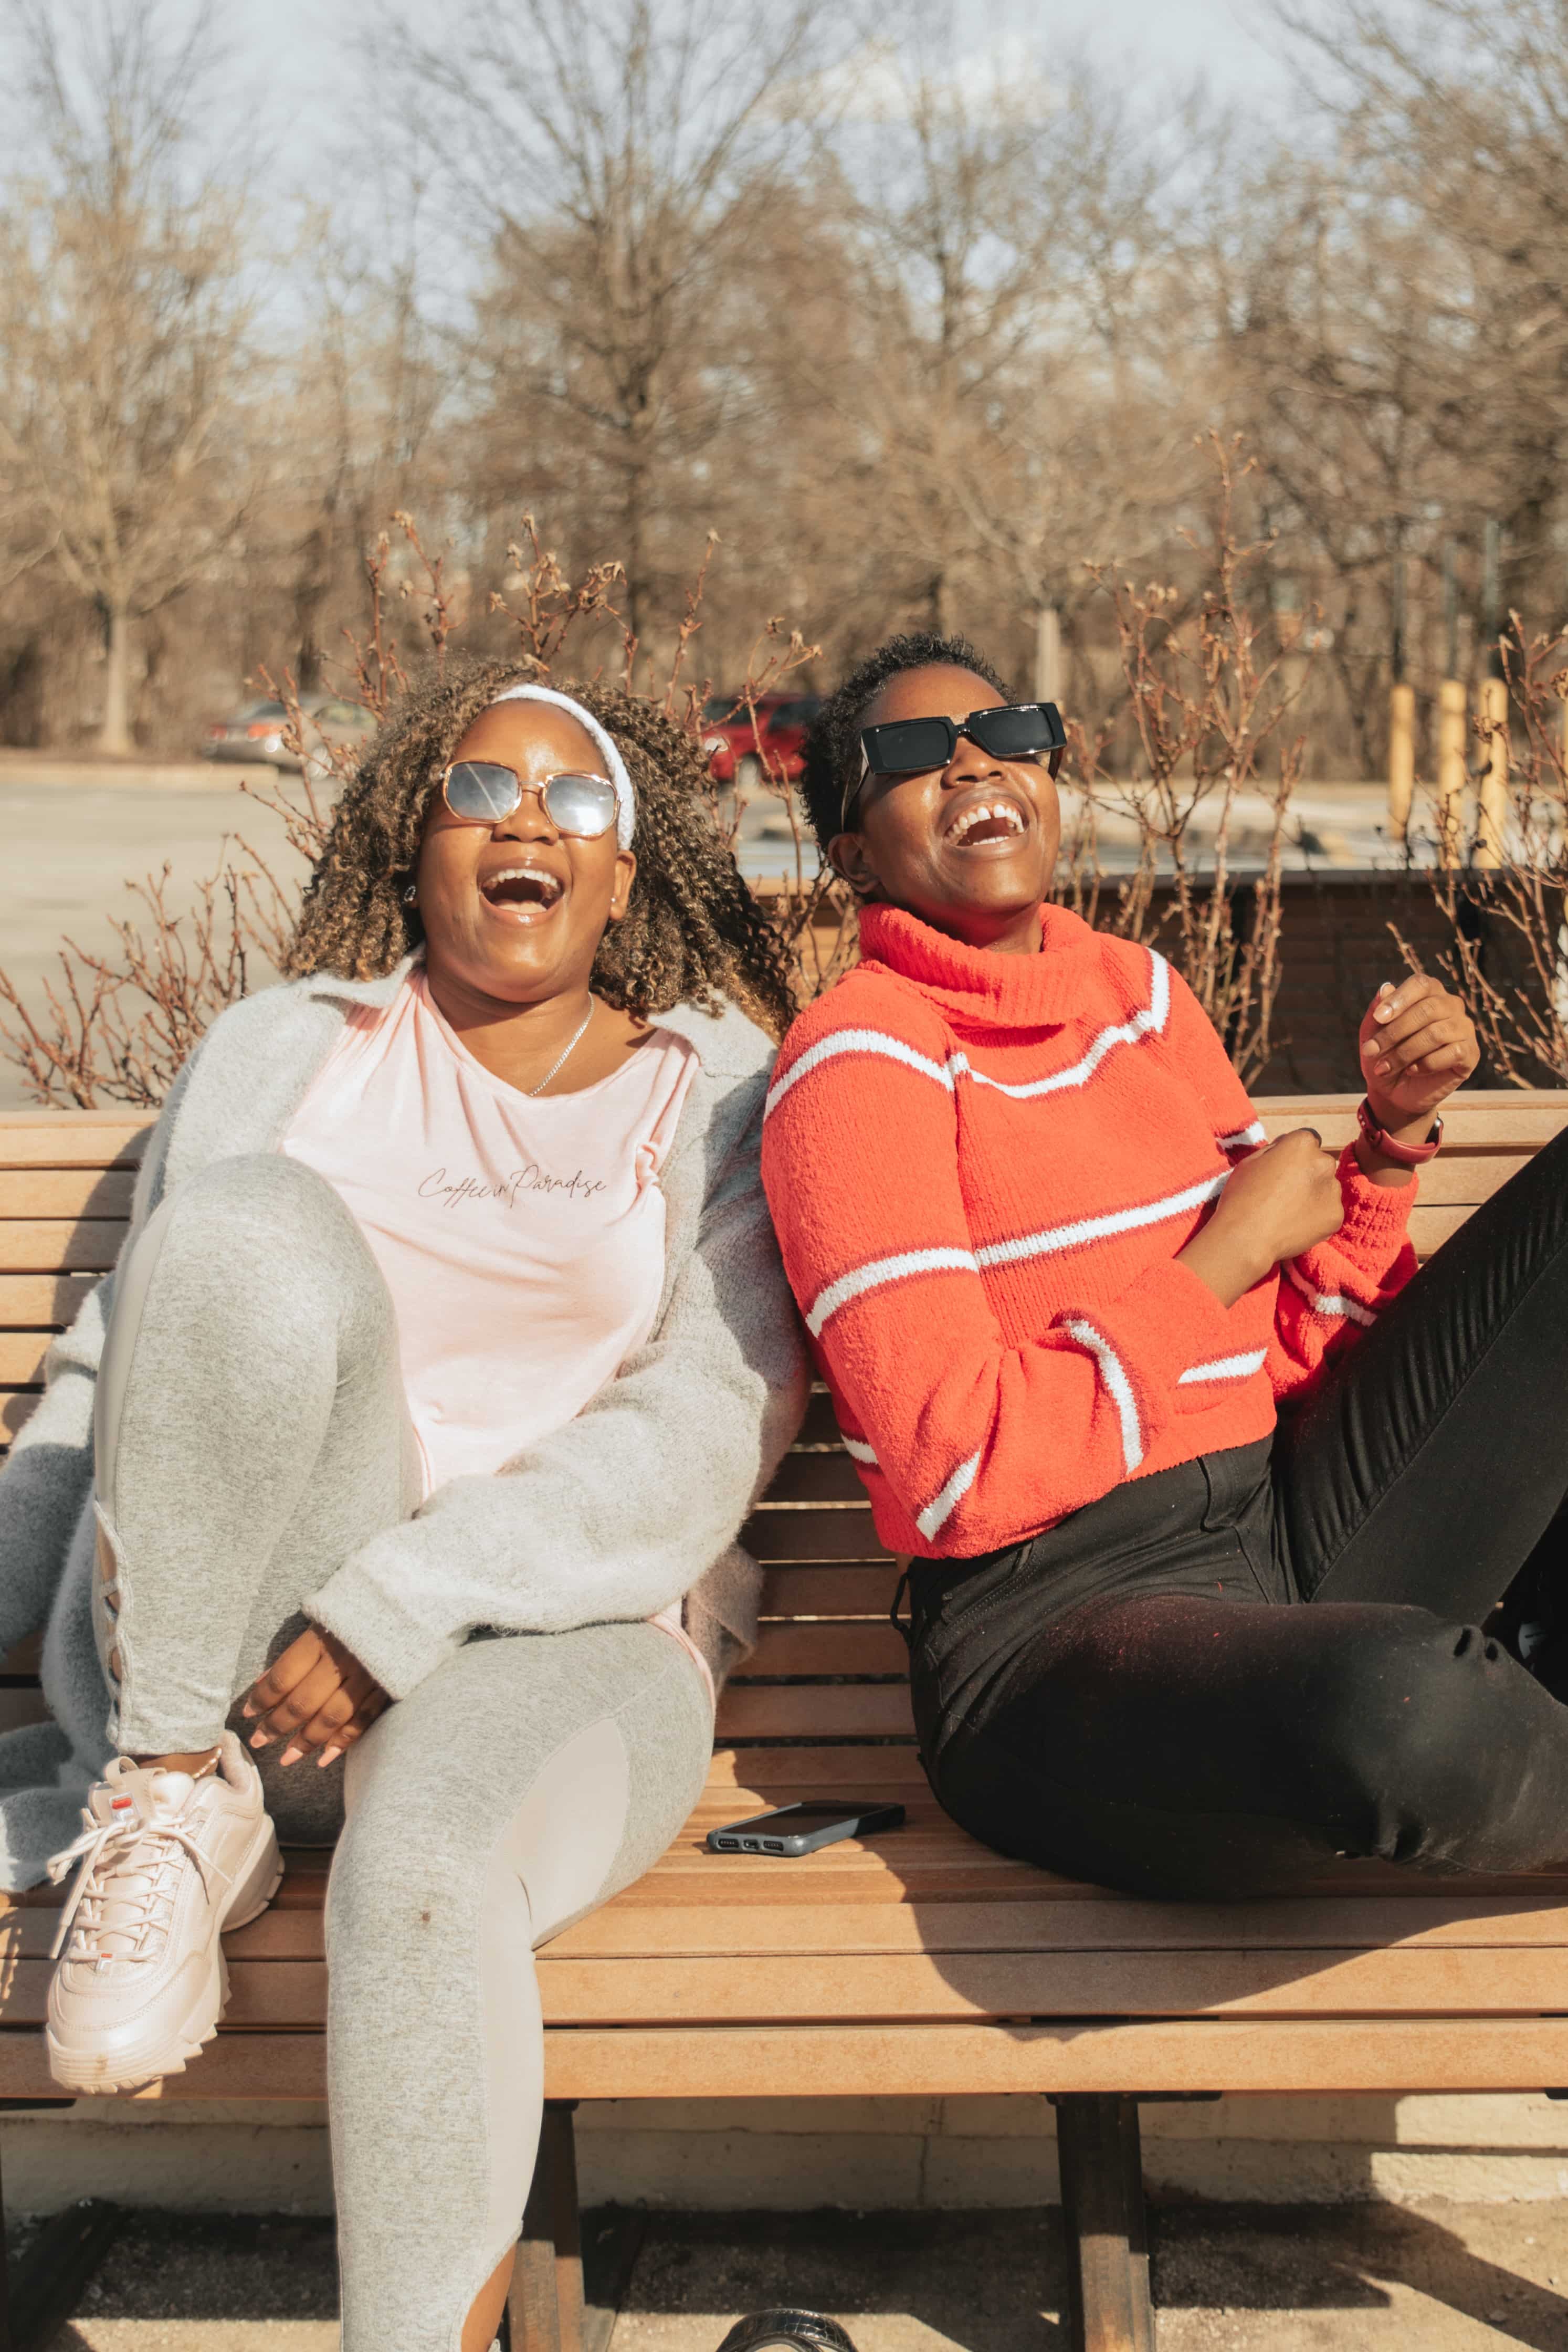 Two friends sit together on a park bench on a winter day. They are both Black women, wearing sunglasses and casual, warm clothing. They both have their heads tilted back and are laughing